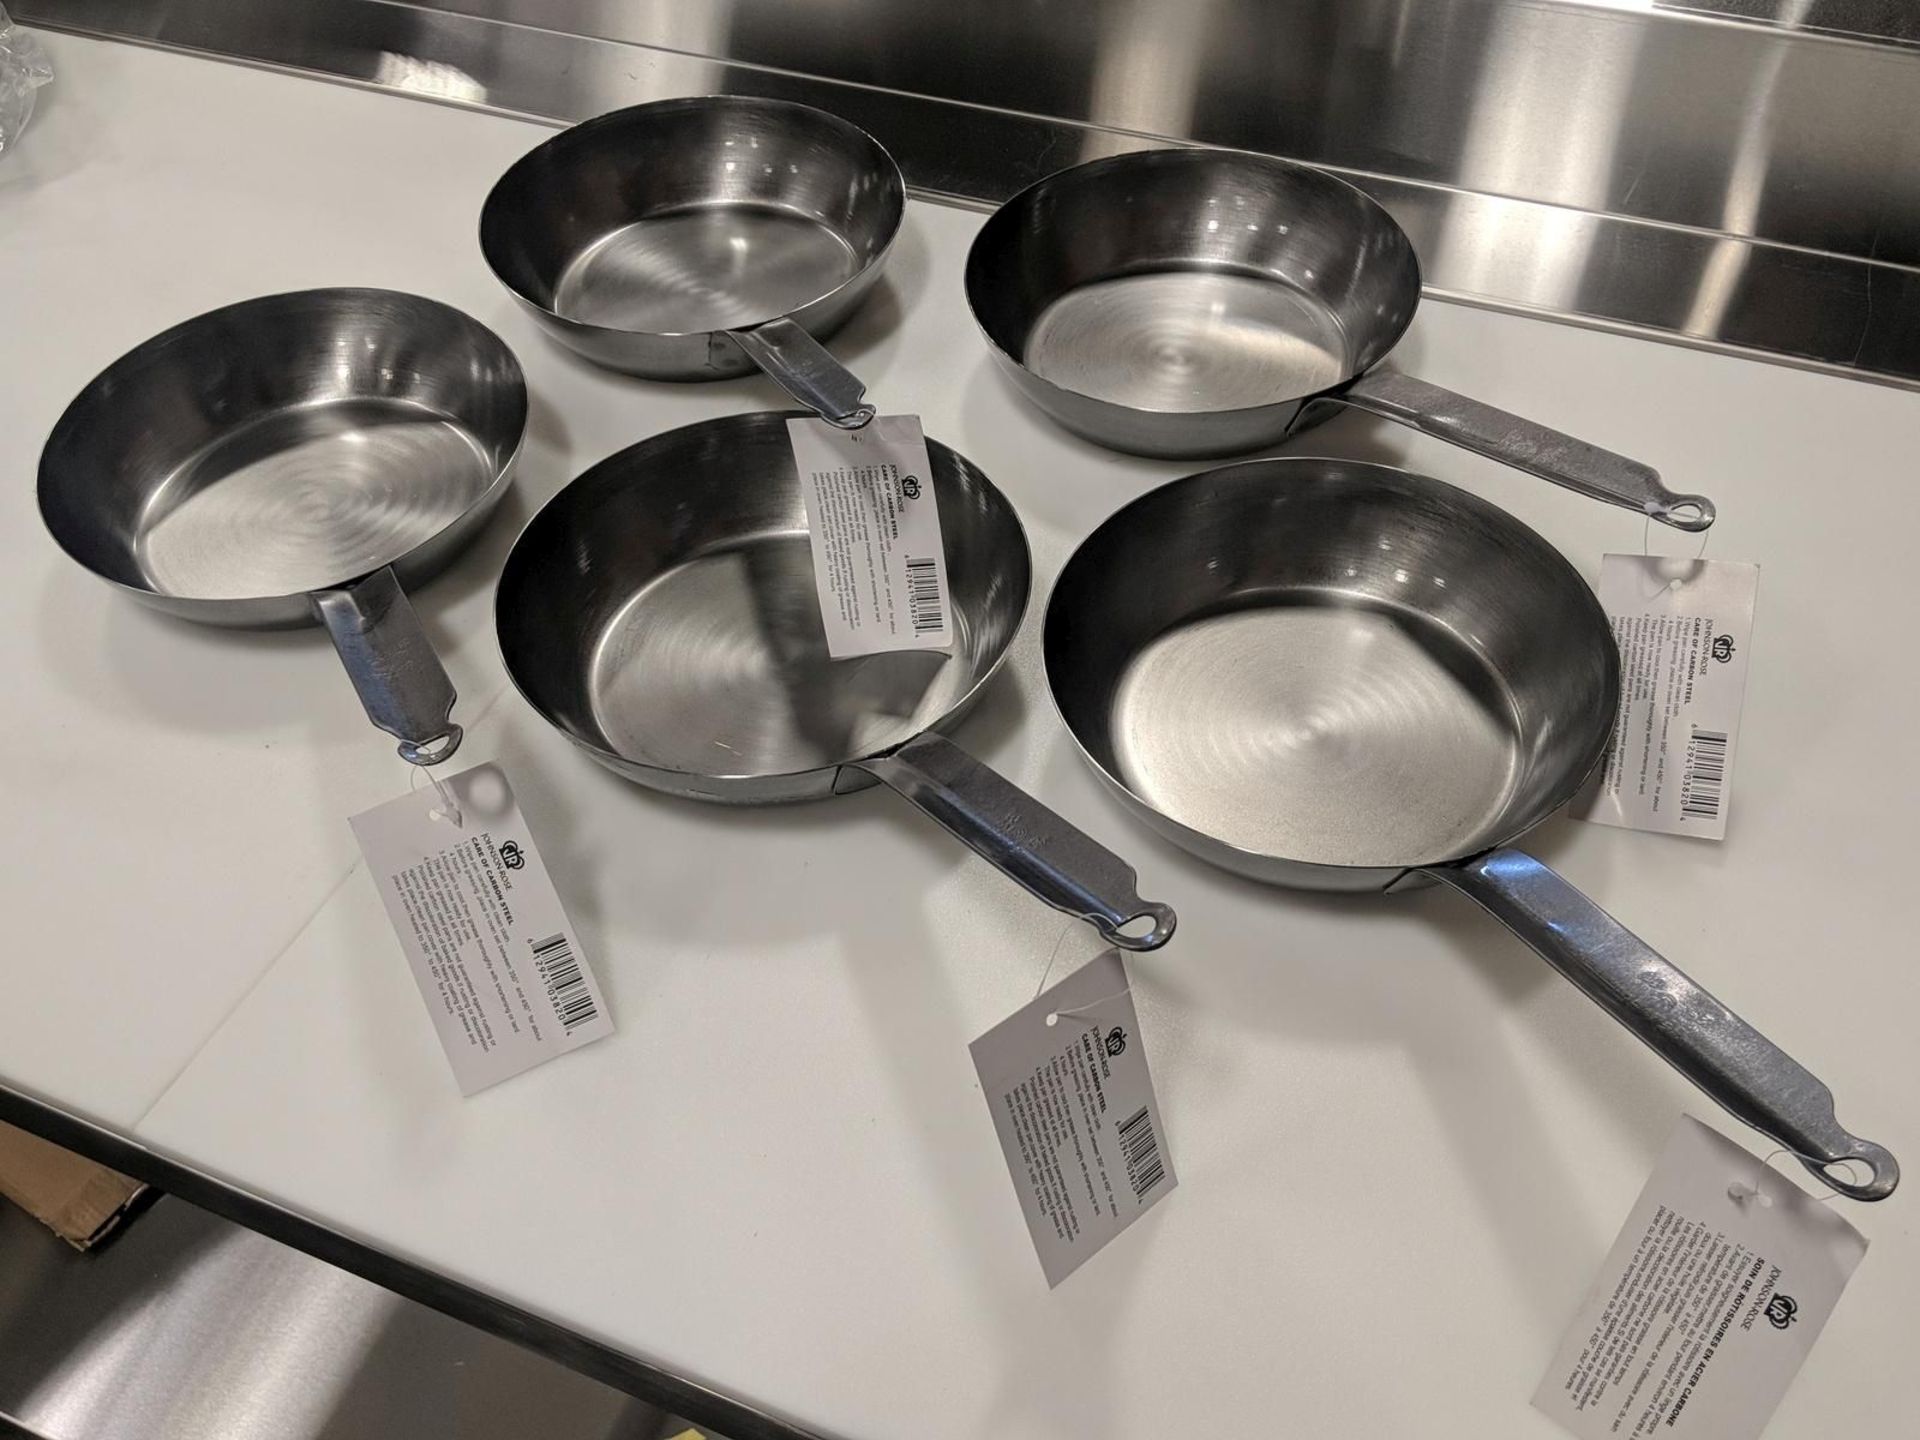 8.25" Carbon Steel Fry Pans, Induction Capable - Lot of 5